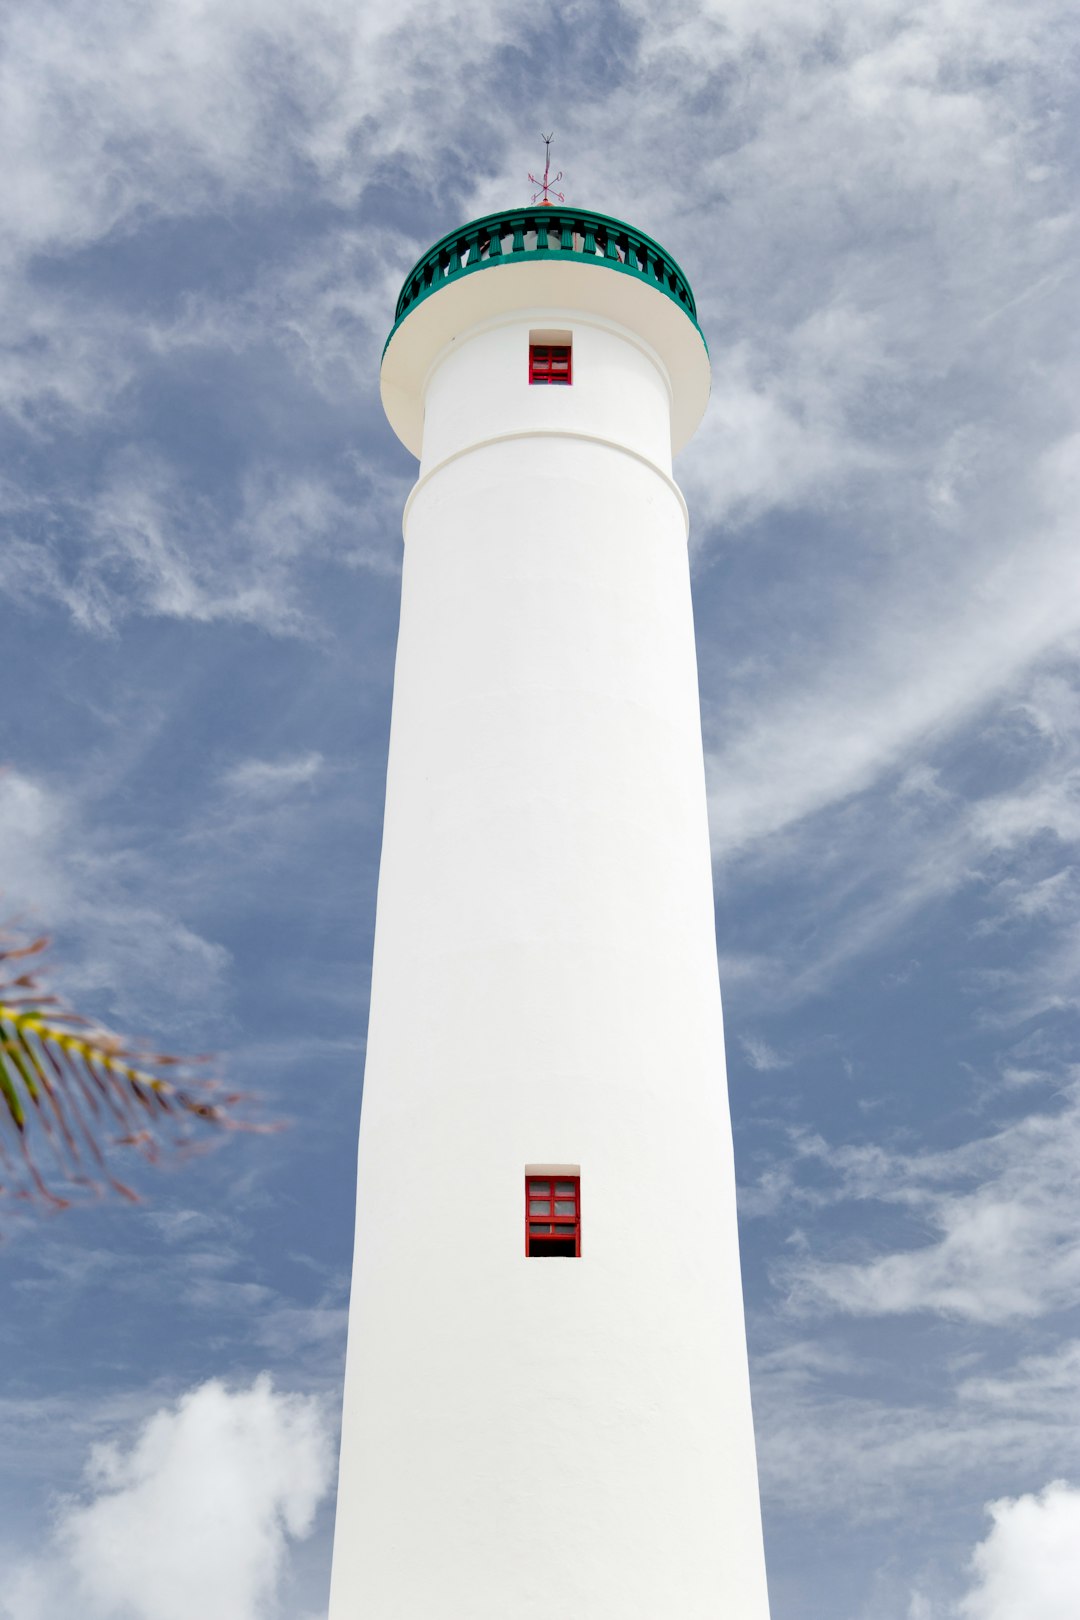 travelers stories about Lighthouse in Cozumel, Mexico